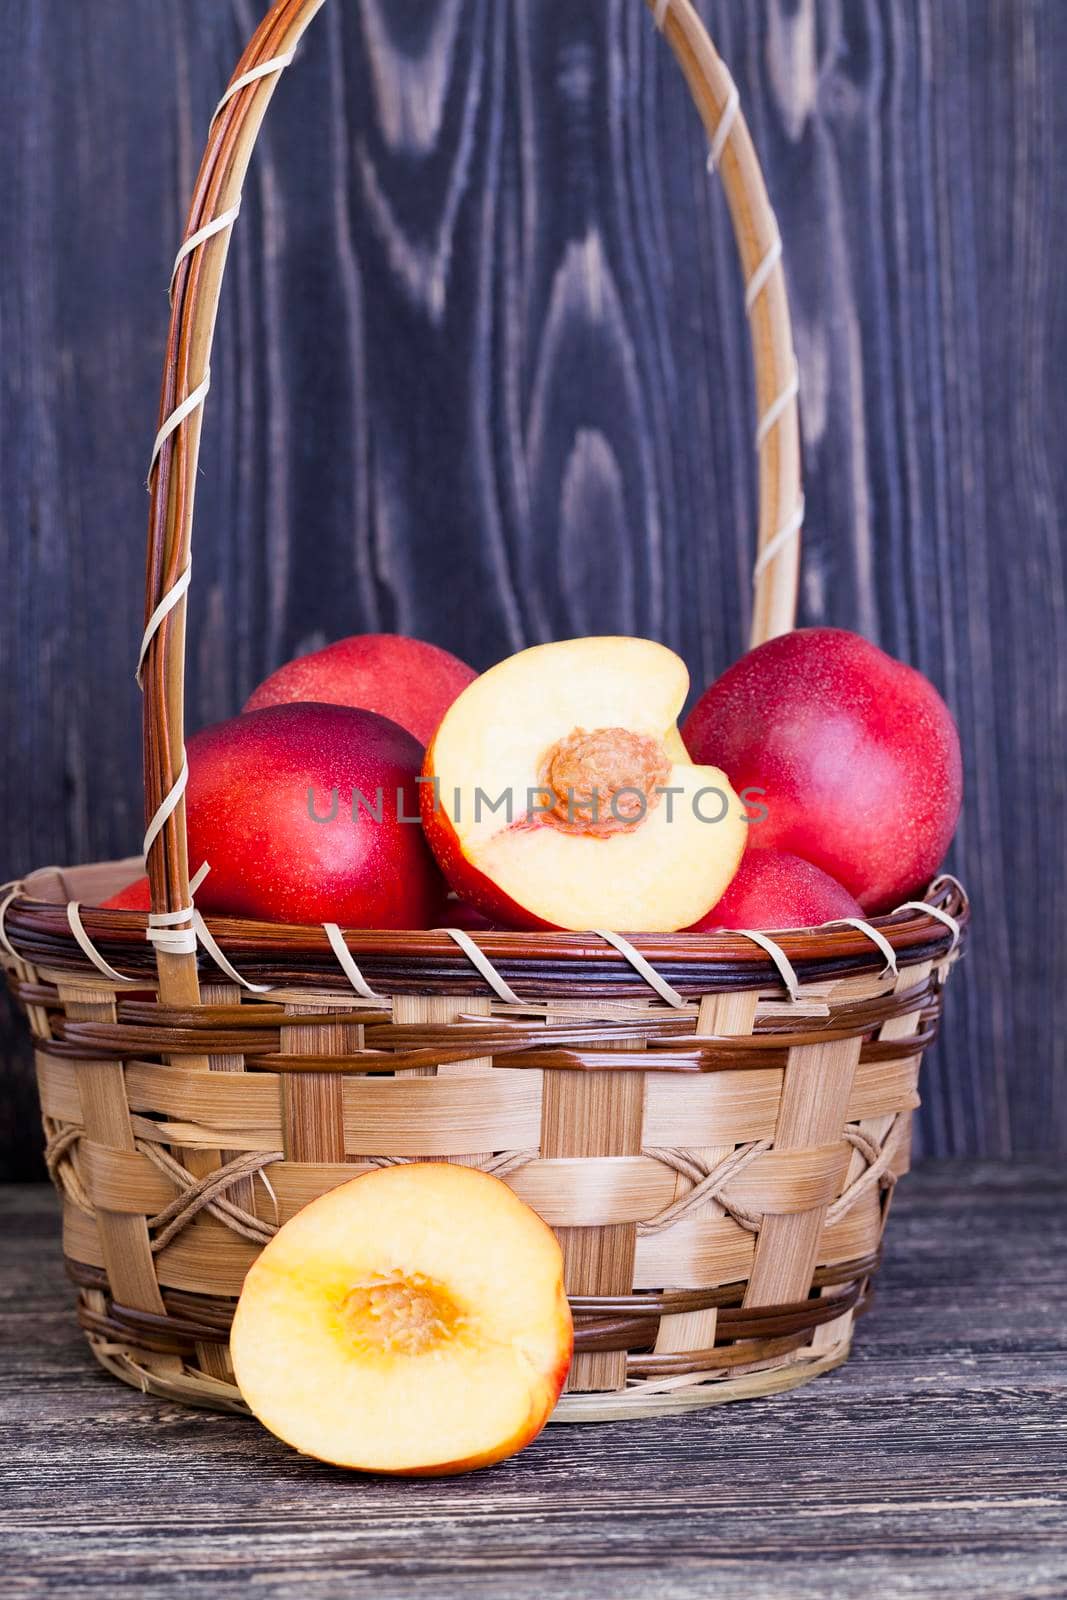 red juicy nectarines by avq